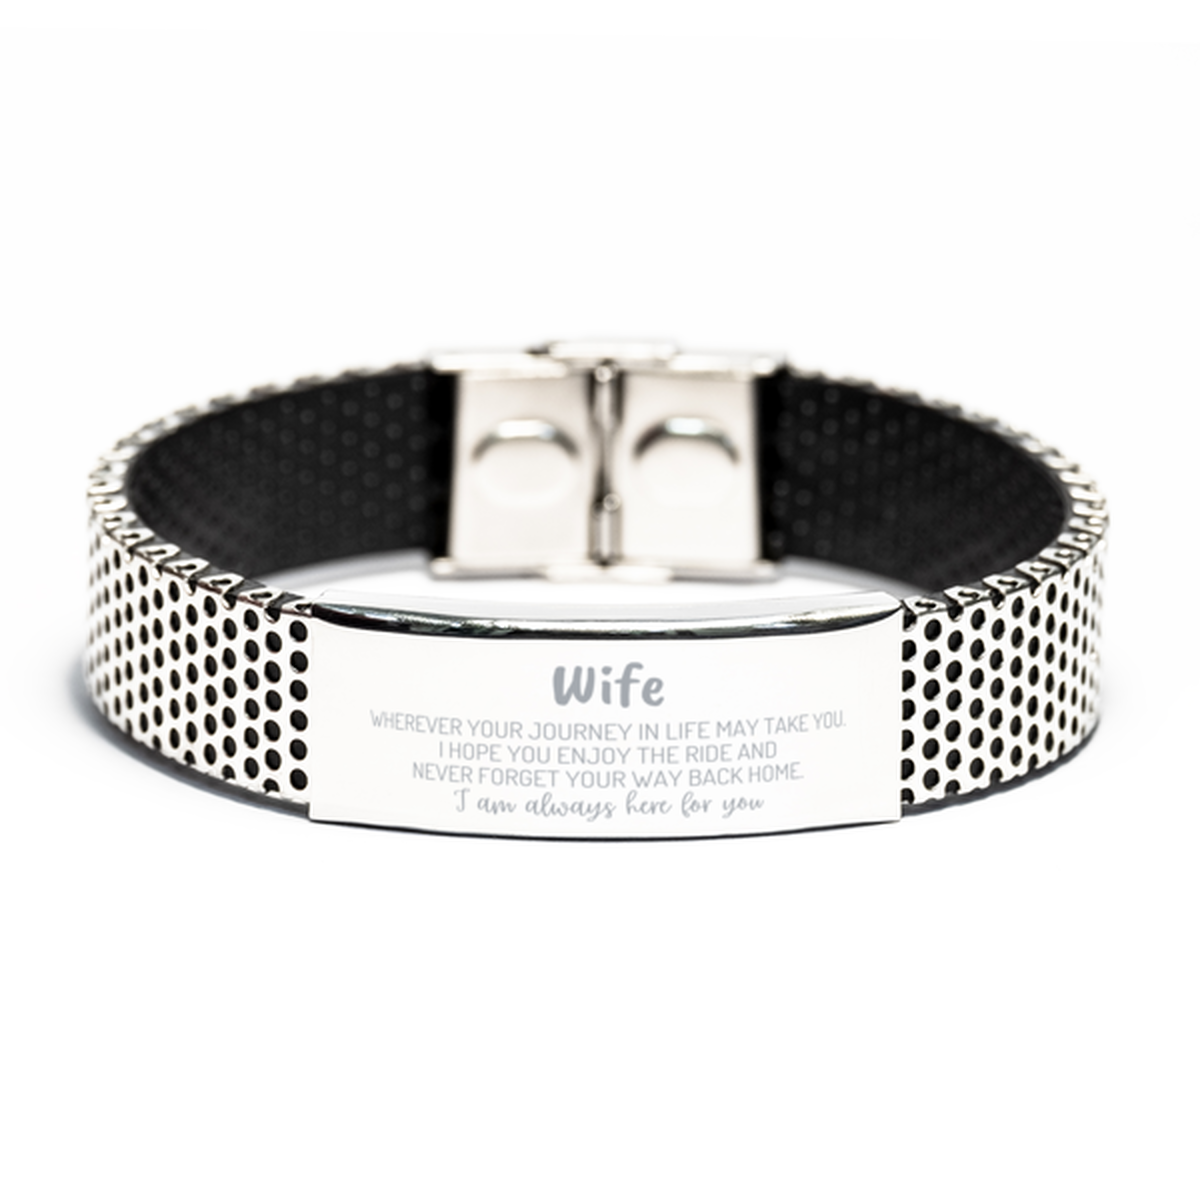 Wife wherever your journey in life may take you, I am always here for you Wife Stainless Steel Bracelet, Awesome Christmas Gifts For Wife, Wife Birthday Gifts for Men Women Family Loved One